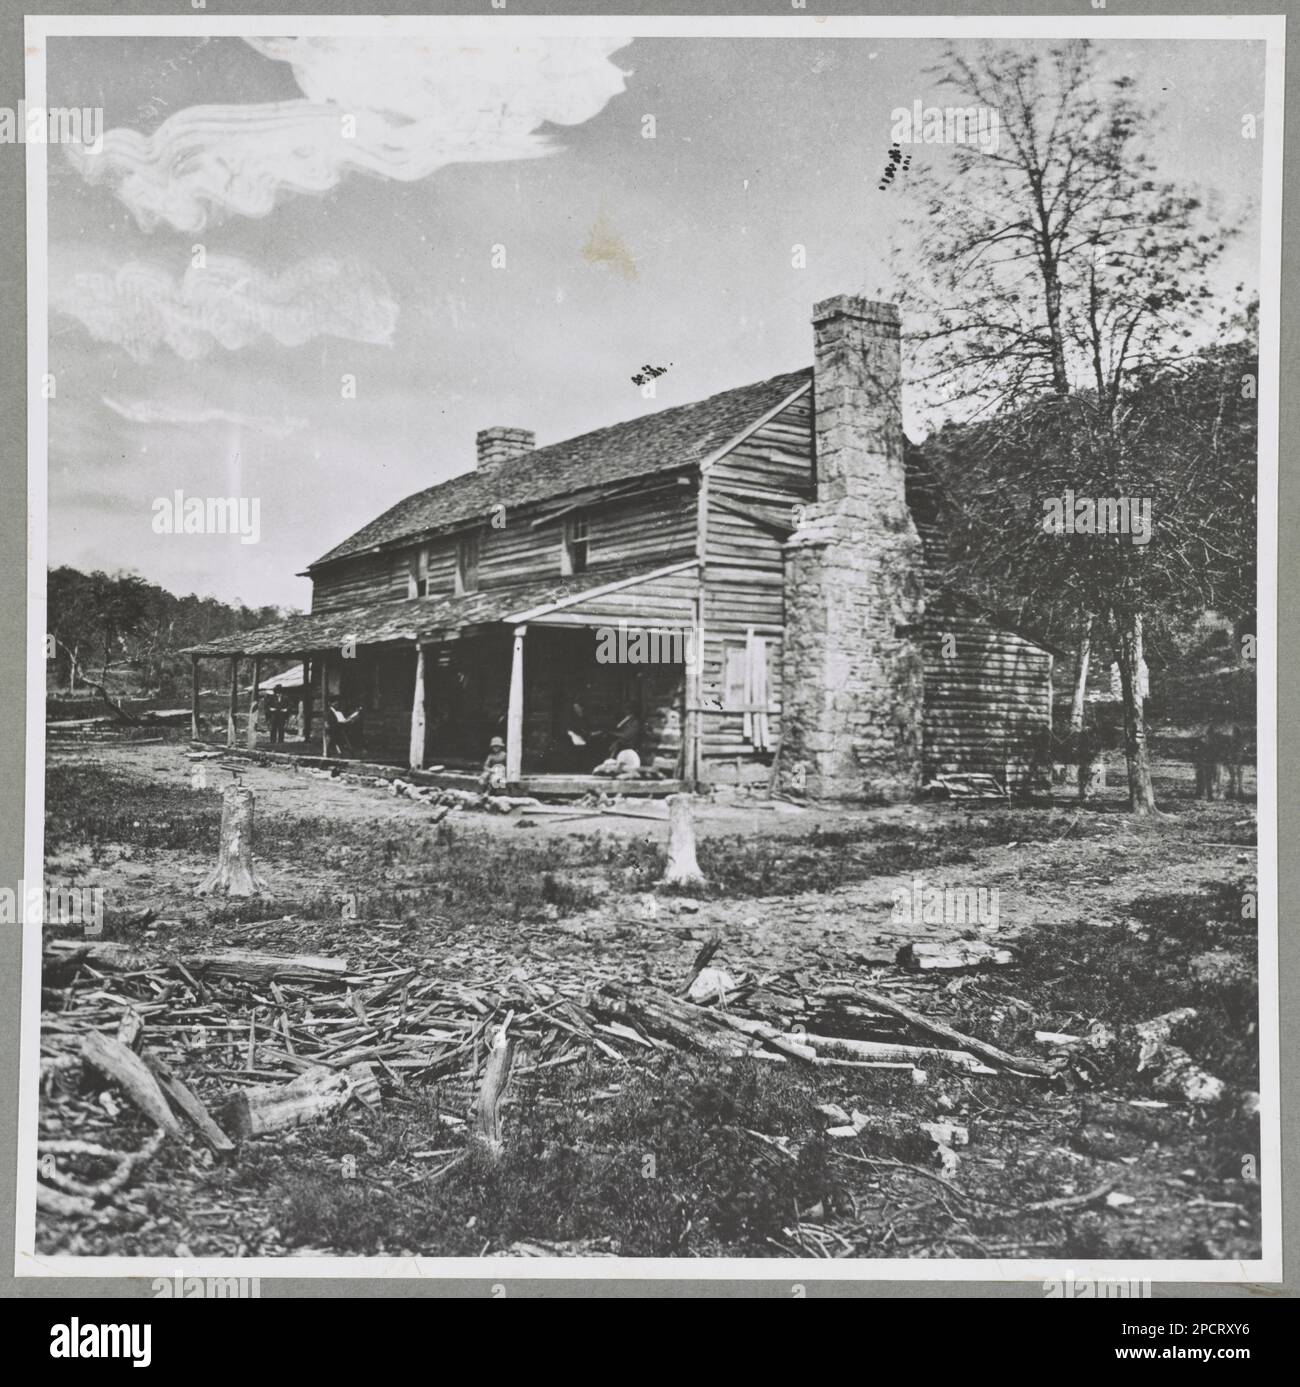 The John Ross house, Rossville Gap, Ga. Hdq. of General Gordon Granger, Battle of Chickmauga i.e. Chickamauga. Title from item, Brady-Handy Collection, Original print in PH - Barnard, (G), no. 16, Published in: Photographic views of Sherman's campaign. New York : Dover, 1977, plate 16. United States, History, Civil War, 1861-1865, United States, Georgia. Stock Photo